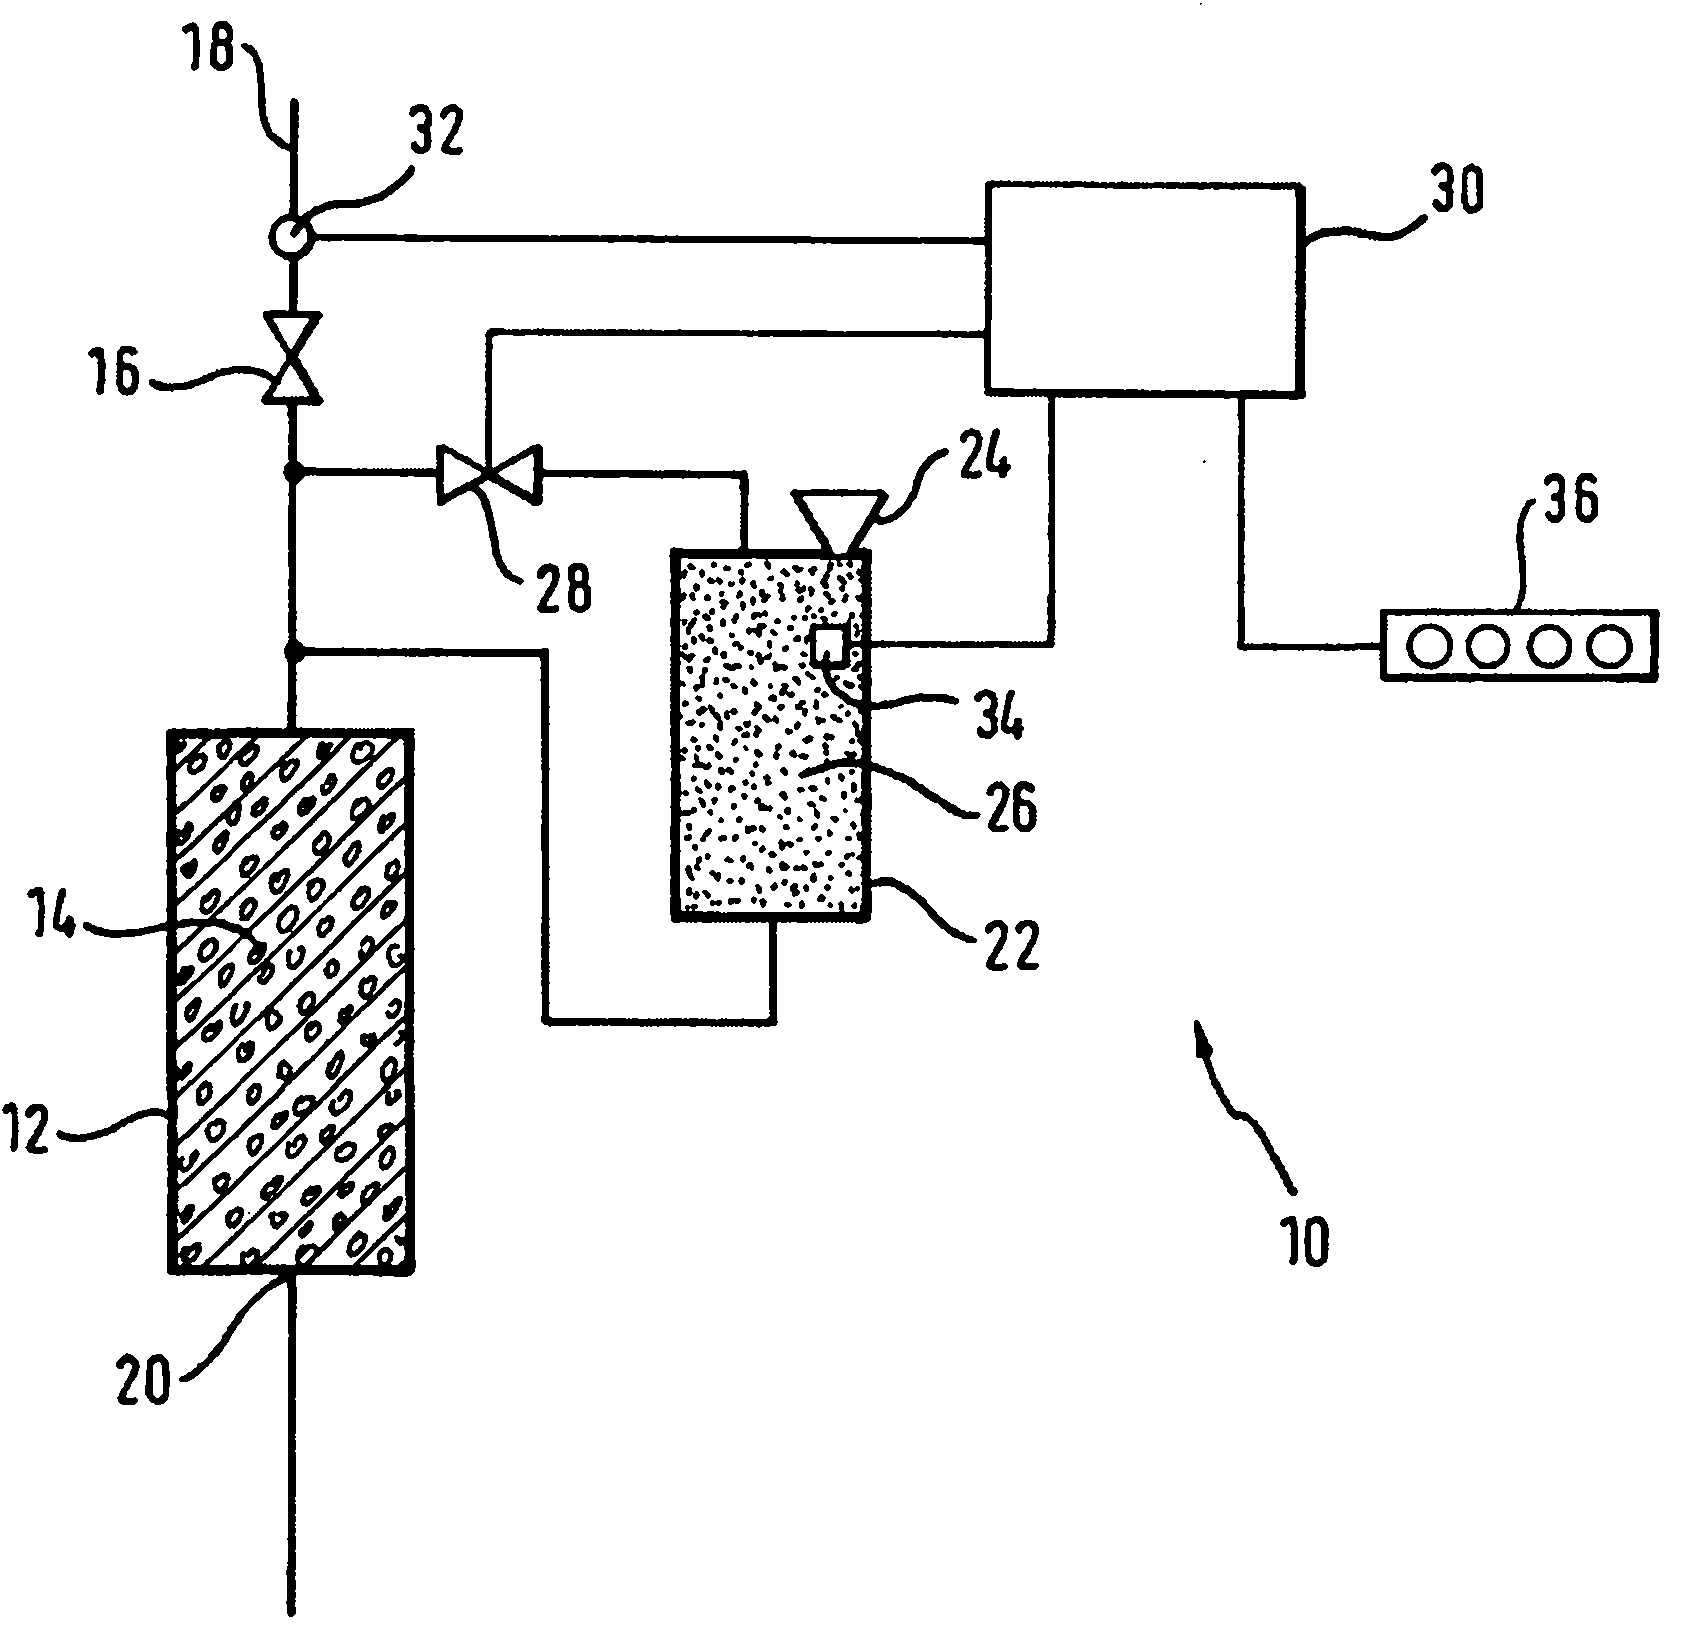 Water-conducting household appliance comprising a water softening device